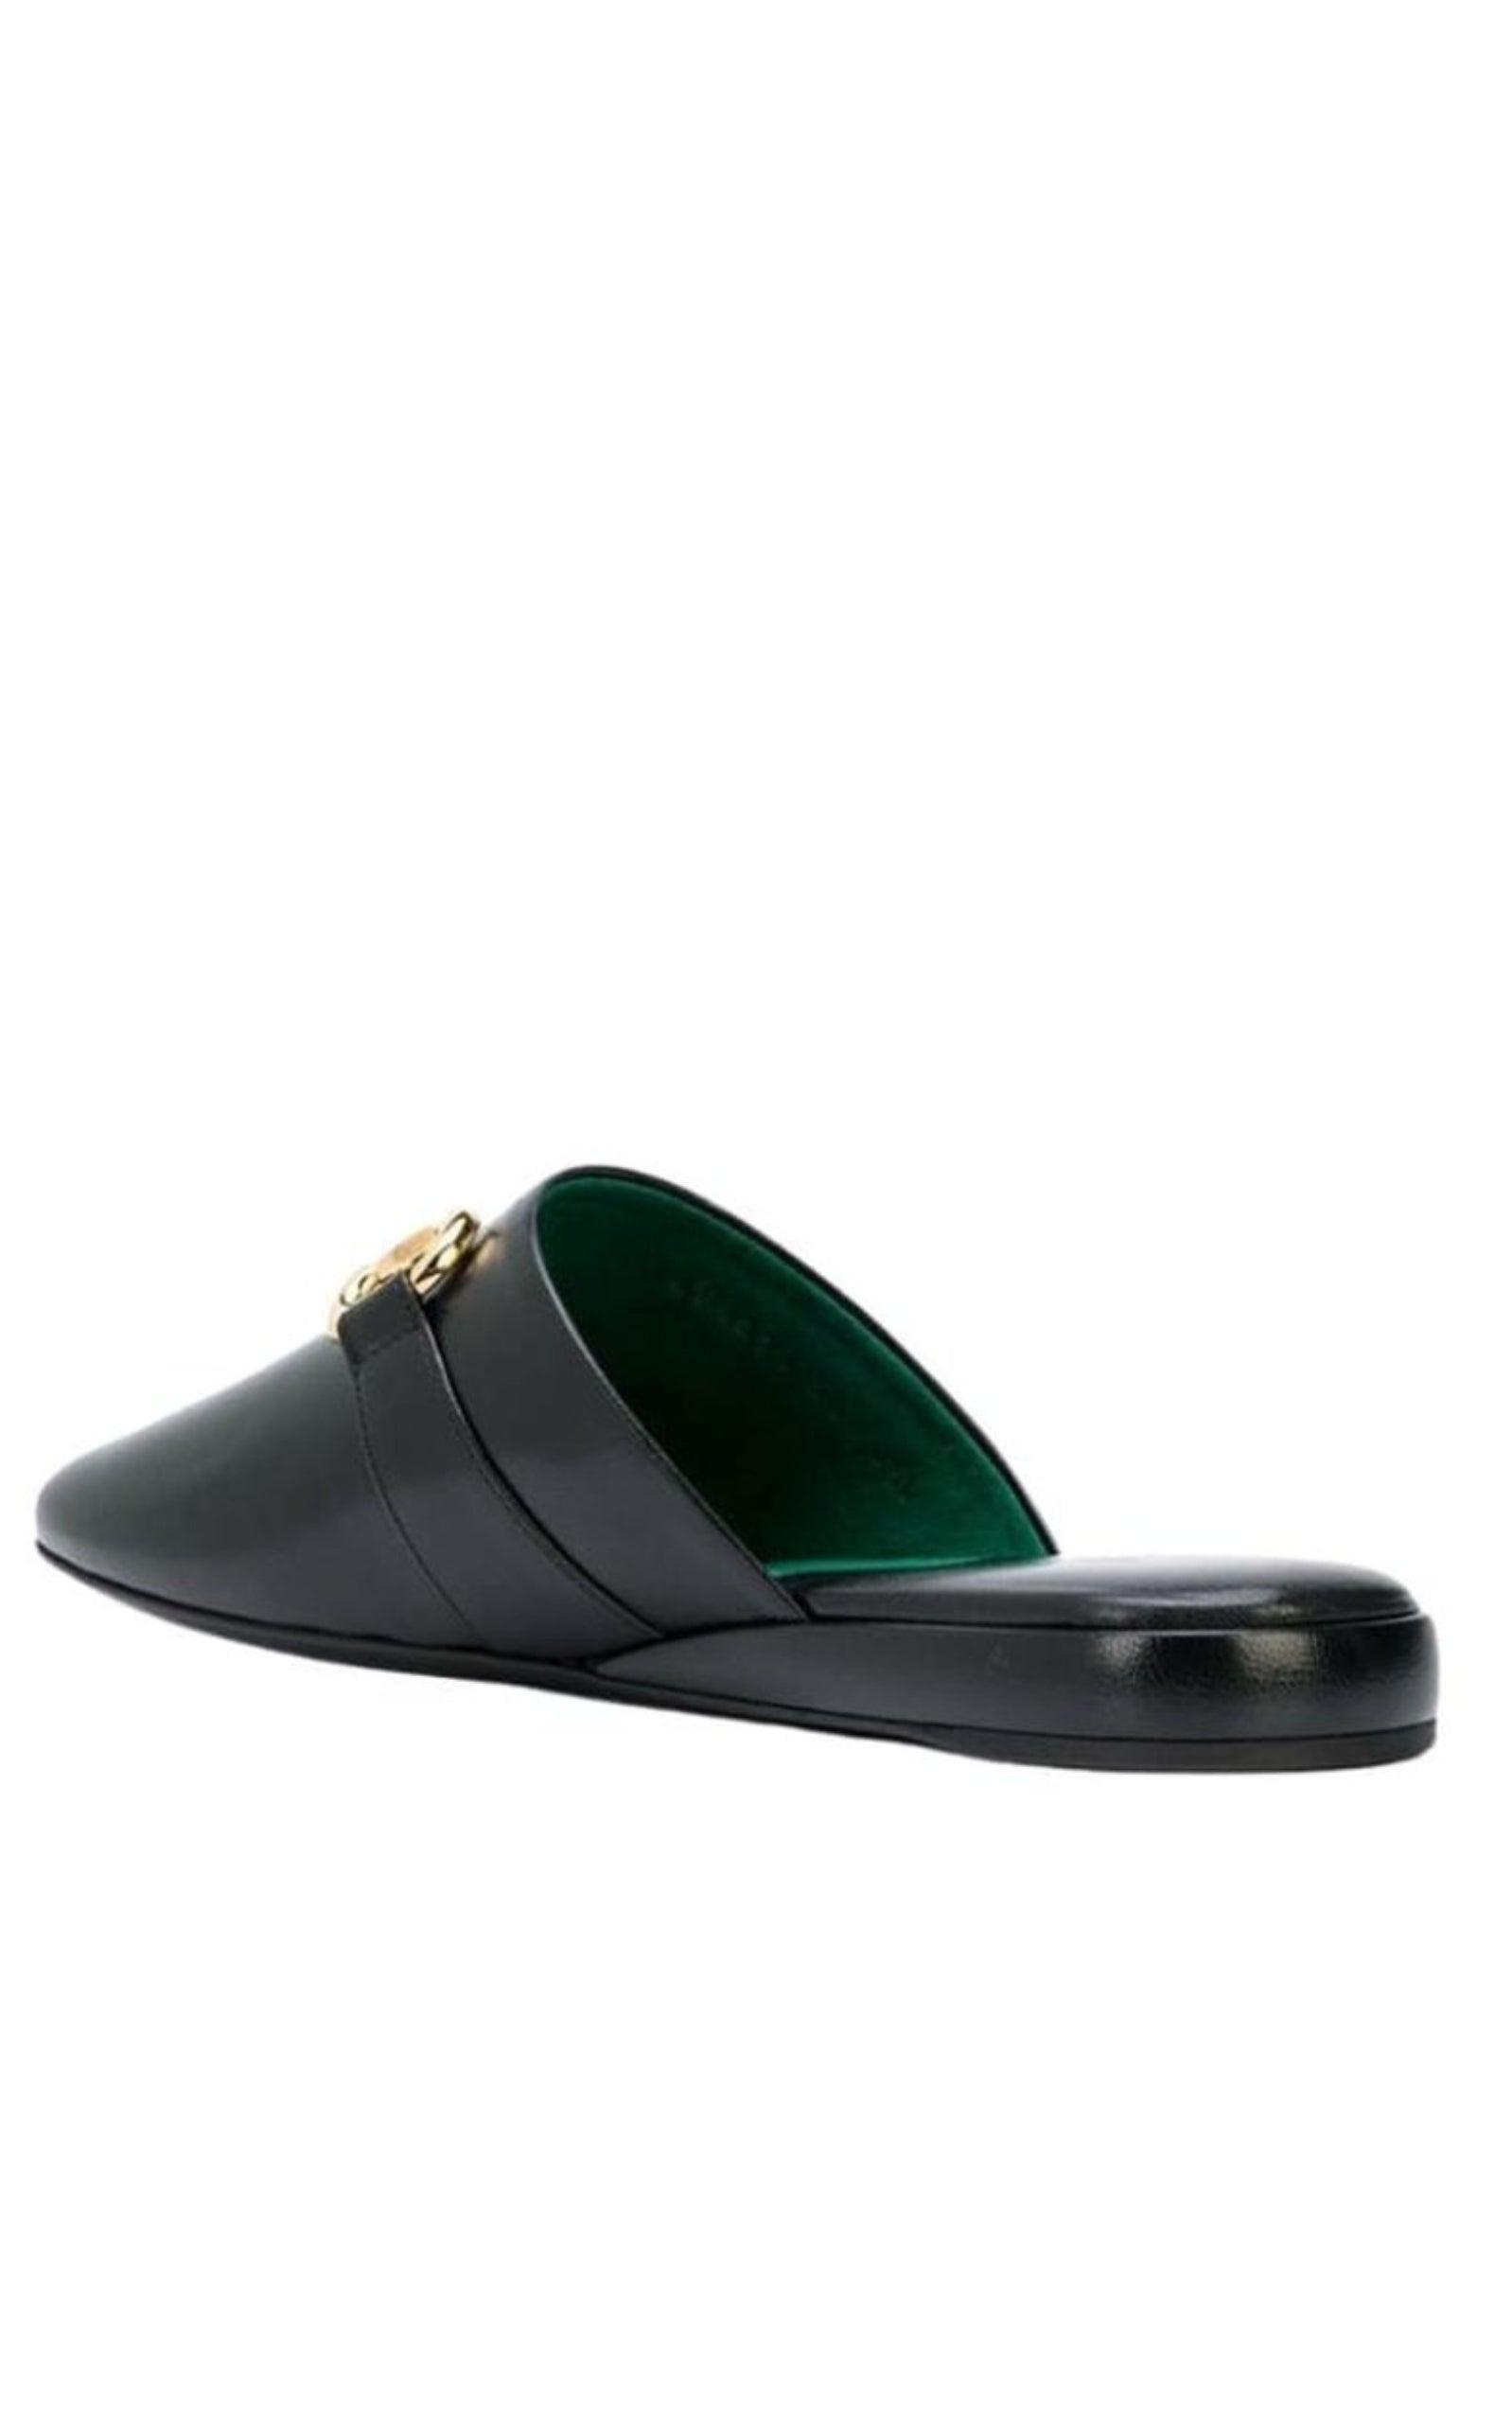  GucciPericle Horsebit Leather Slippers - Runway Catalog